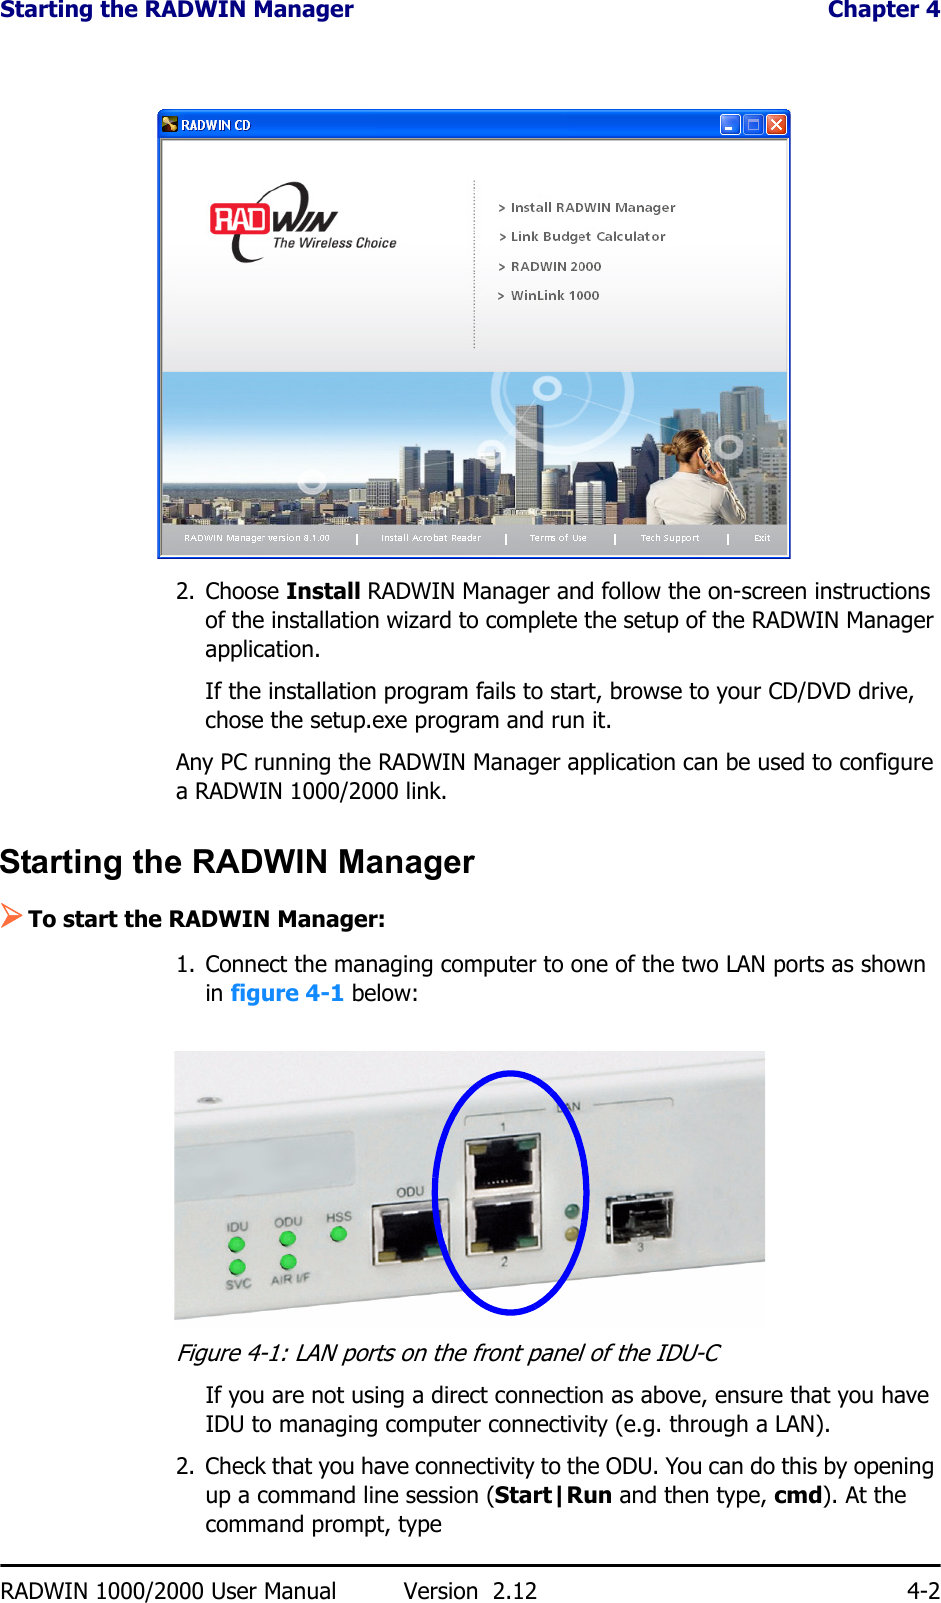 Starting the RADWIN Manager  Chapter 4RADWIN 1000/2000 User Manual Version  2.12 4-22. Choose Install RADWIN Manager and follow the on-screen instructions of the installation wizard to complete the setup of the RADWIN Manager application.If the installation program fails to start, browse to your CD/DVD drive, chose the setup.exe program and run it.Any PC running the RADWIN Manager application can be used to configure a RADWIN 1000/2000 link.Starting the RADWIN Manager ¾To start the RADWIN Manager:1. Connect the managing computer to one of the two LAN ports as shown in figure 4-1 below:Figure 4-1: LAN ports on the front panel of the IDU-CIf you are not using a direct connection as above, ensure that you have IDU to managing computer connectivity (e.g. through a LAN).2. Check that you have connectivity to the ODU. You can do this by opening up a command line session (Start|Run and then type, cmd). At the command prompt, type